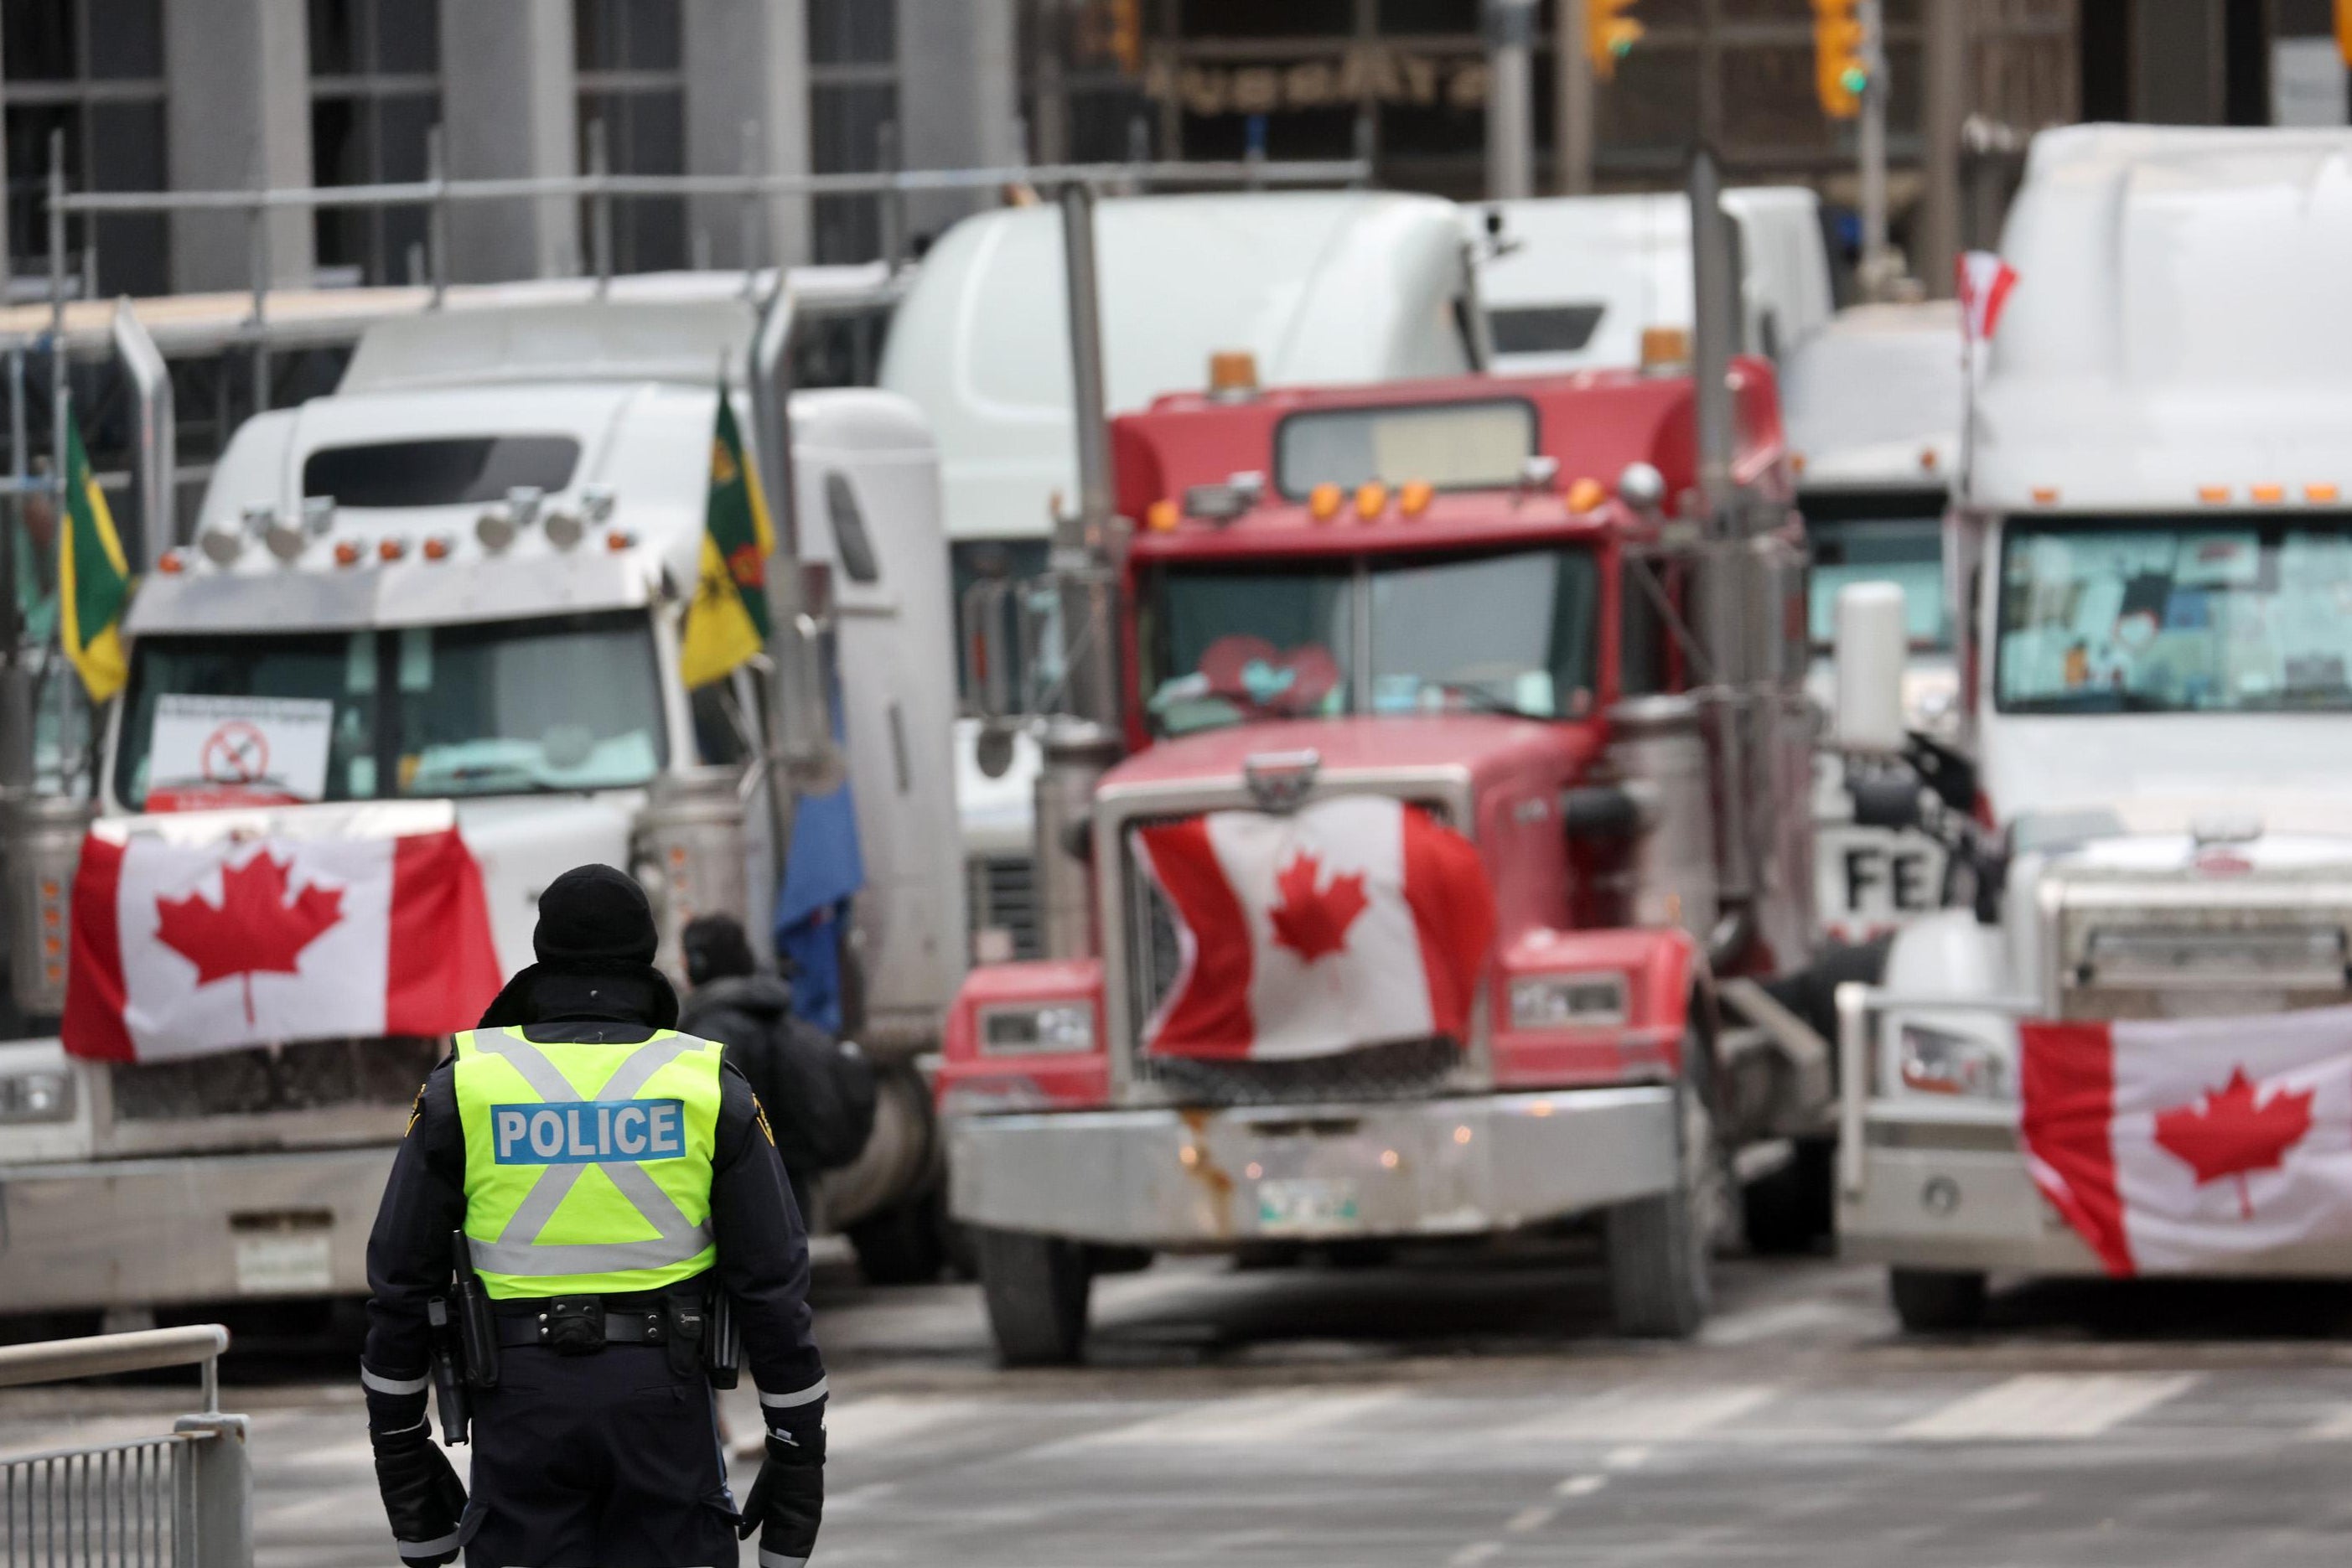 A police officer stands in front of three trucks with Canadian flags on their grilles that are parked in a downtown street